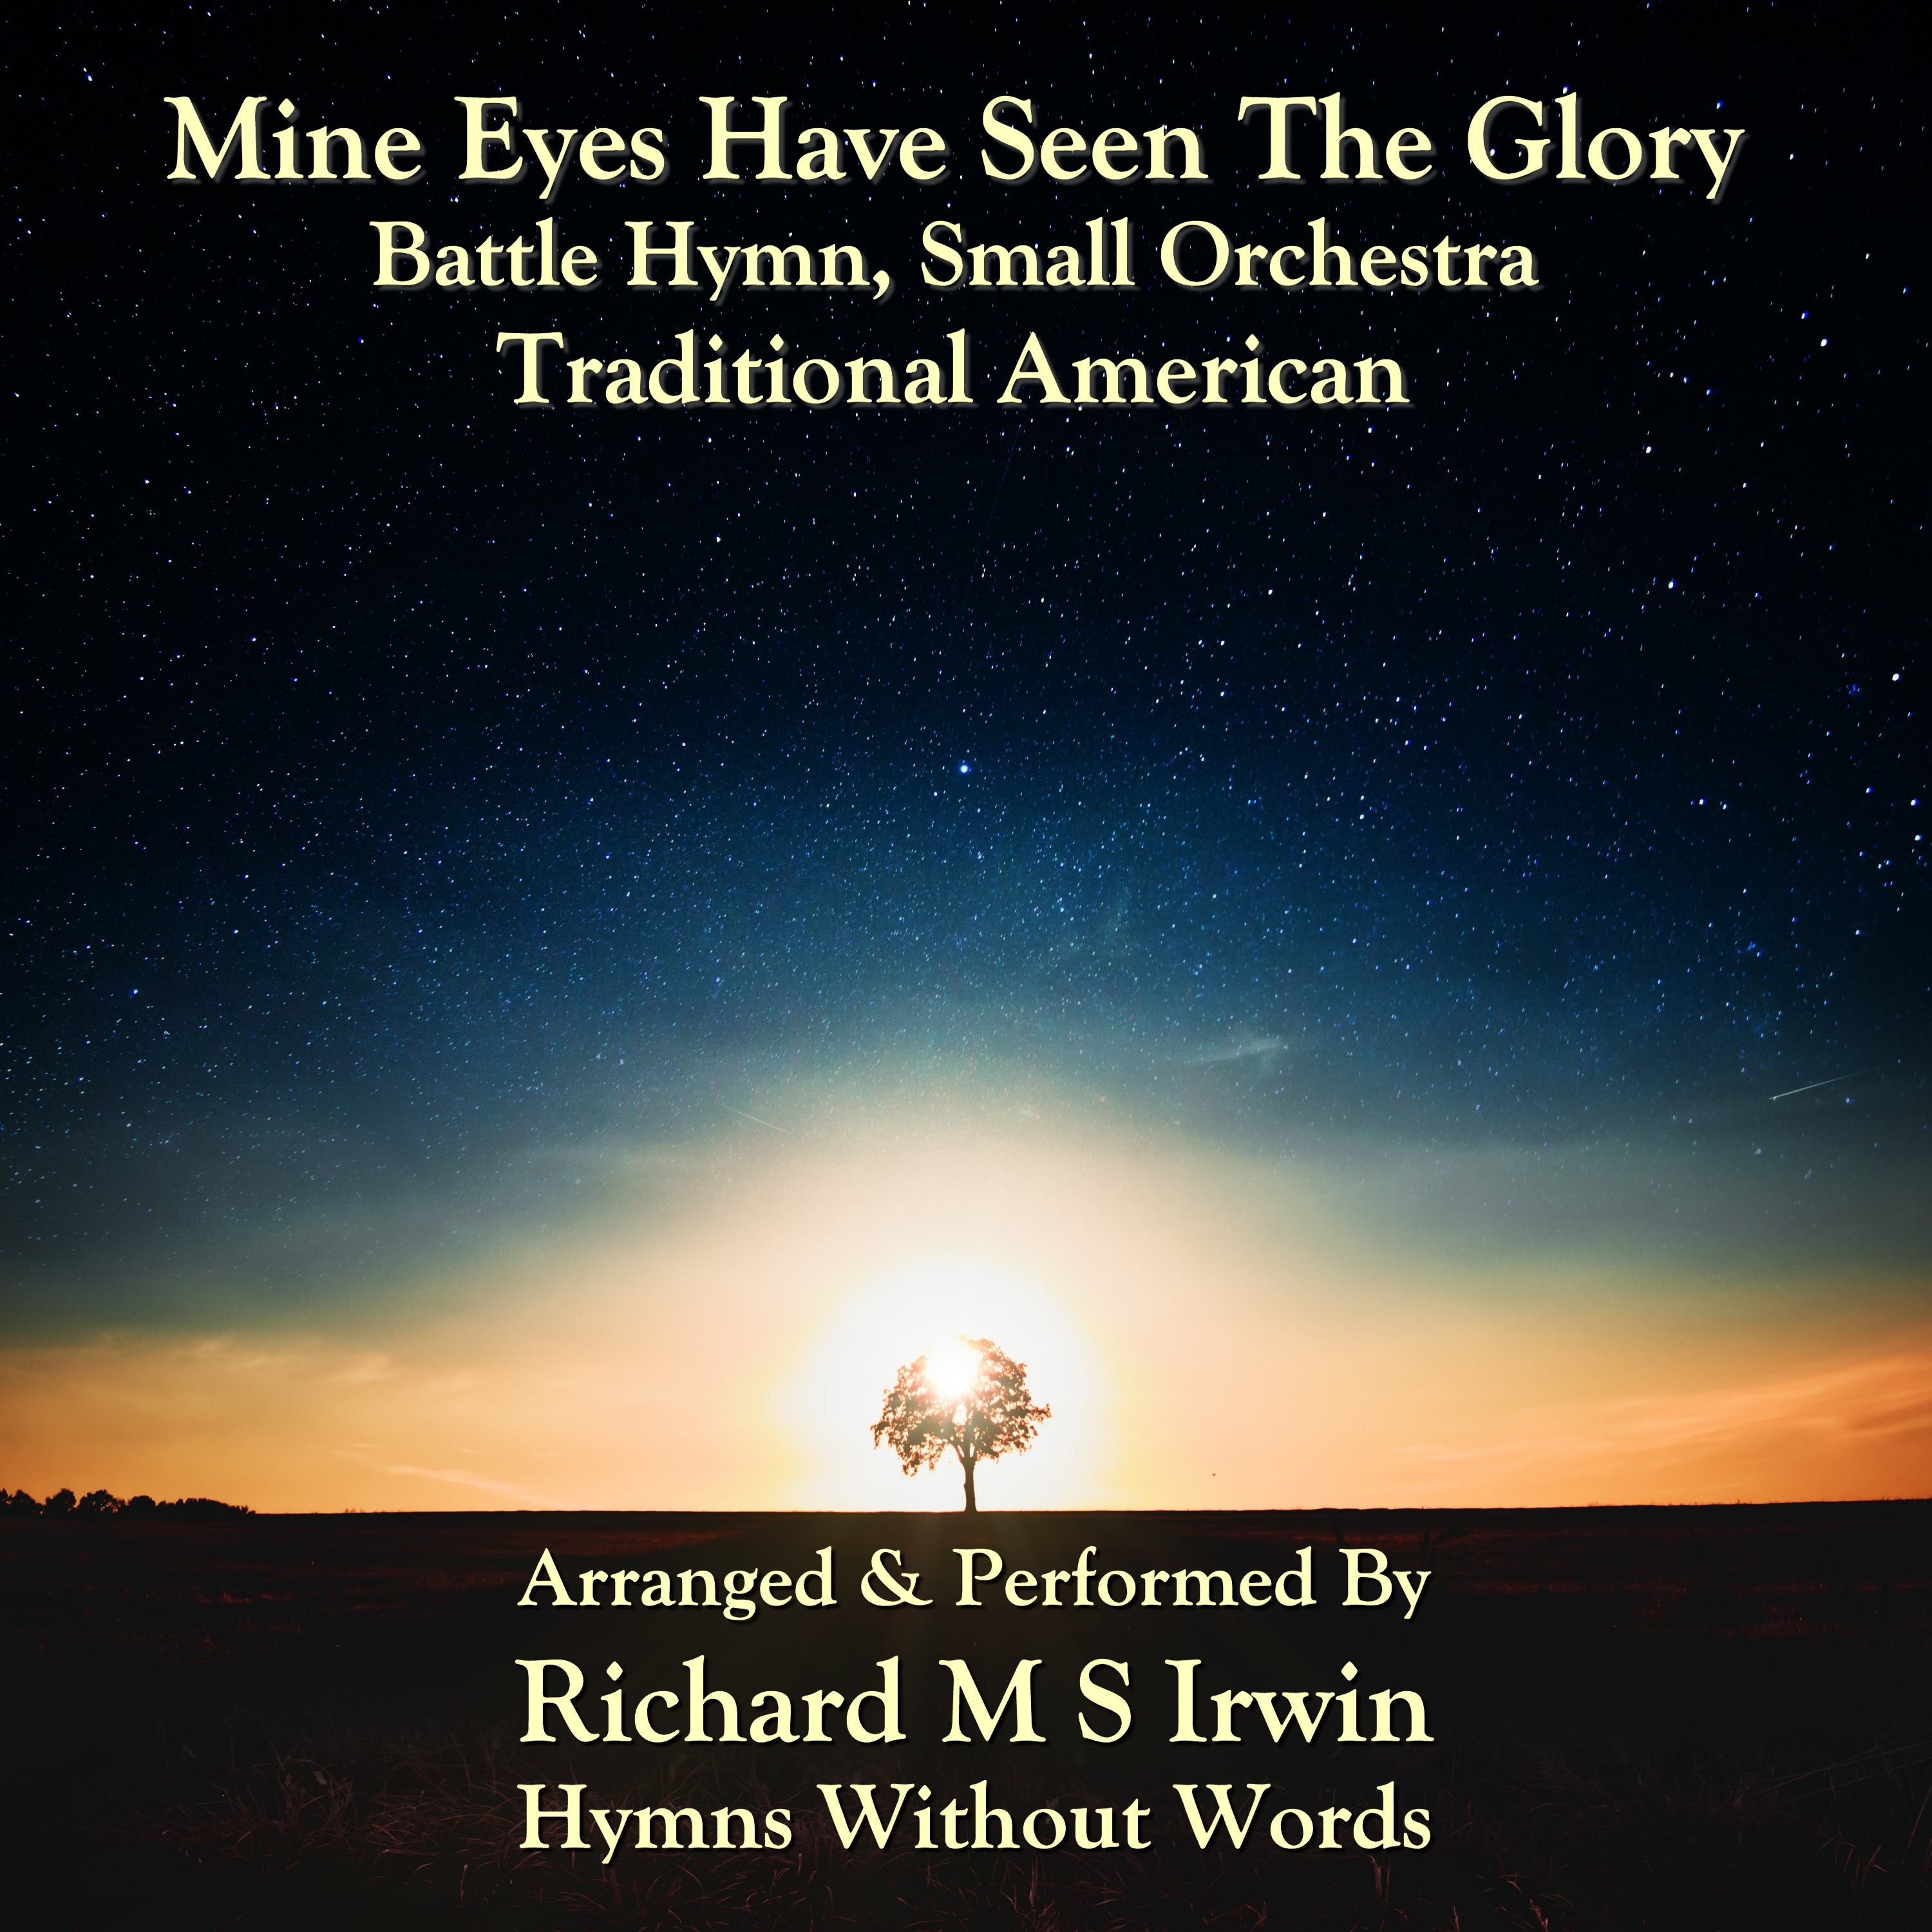 Mine Eyes Have Seen The Glory (Battle Hymn, Small Orchestra)